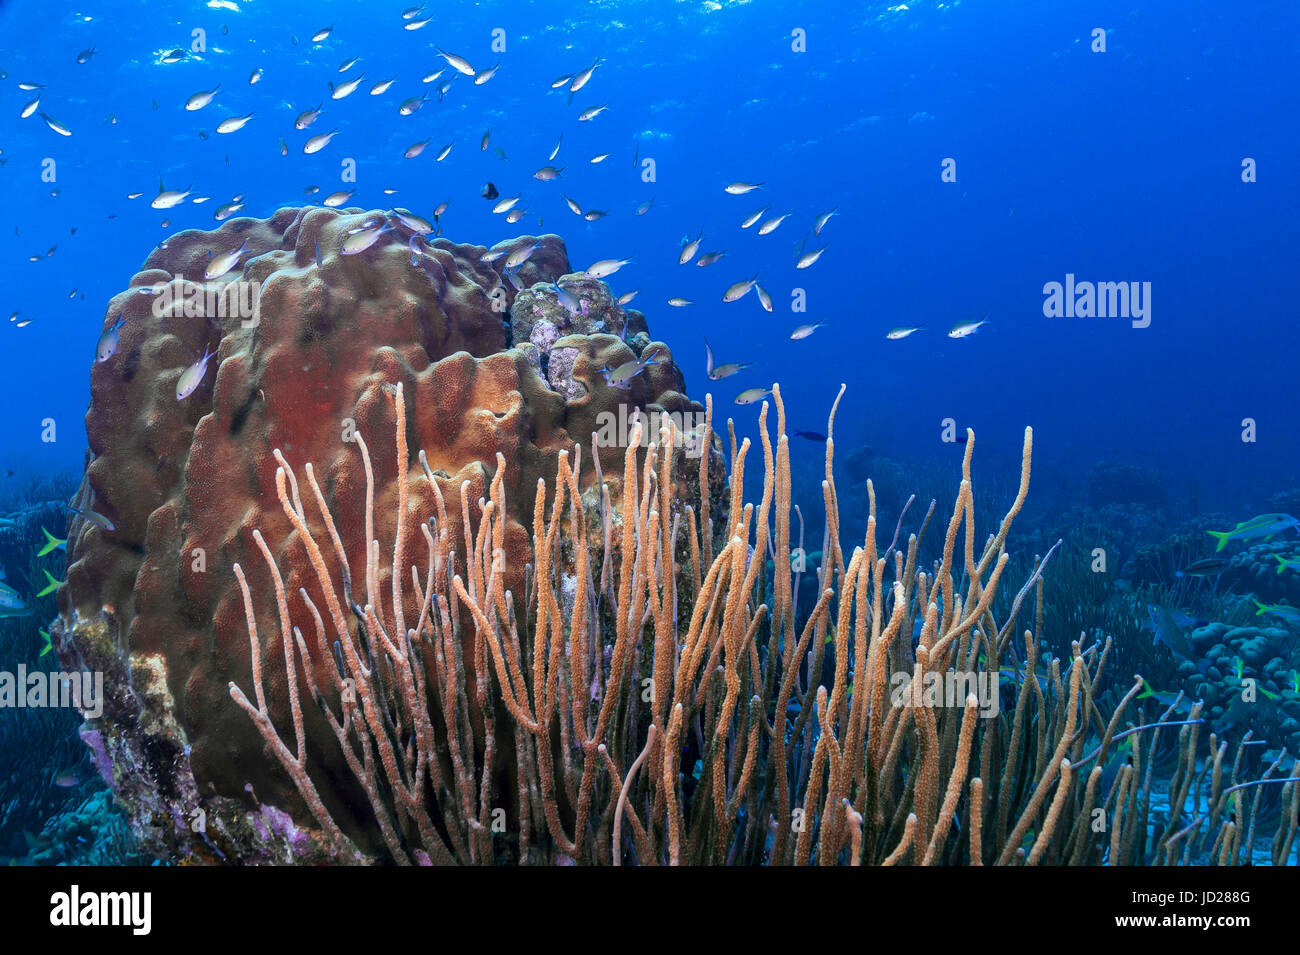 Coral reef underwater off the boast of the island of Bonaire Stock Photo